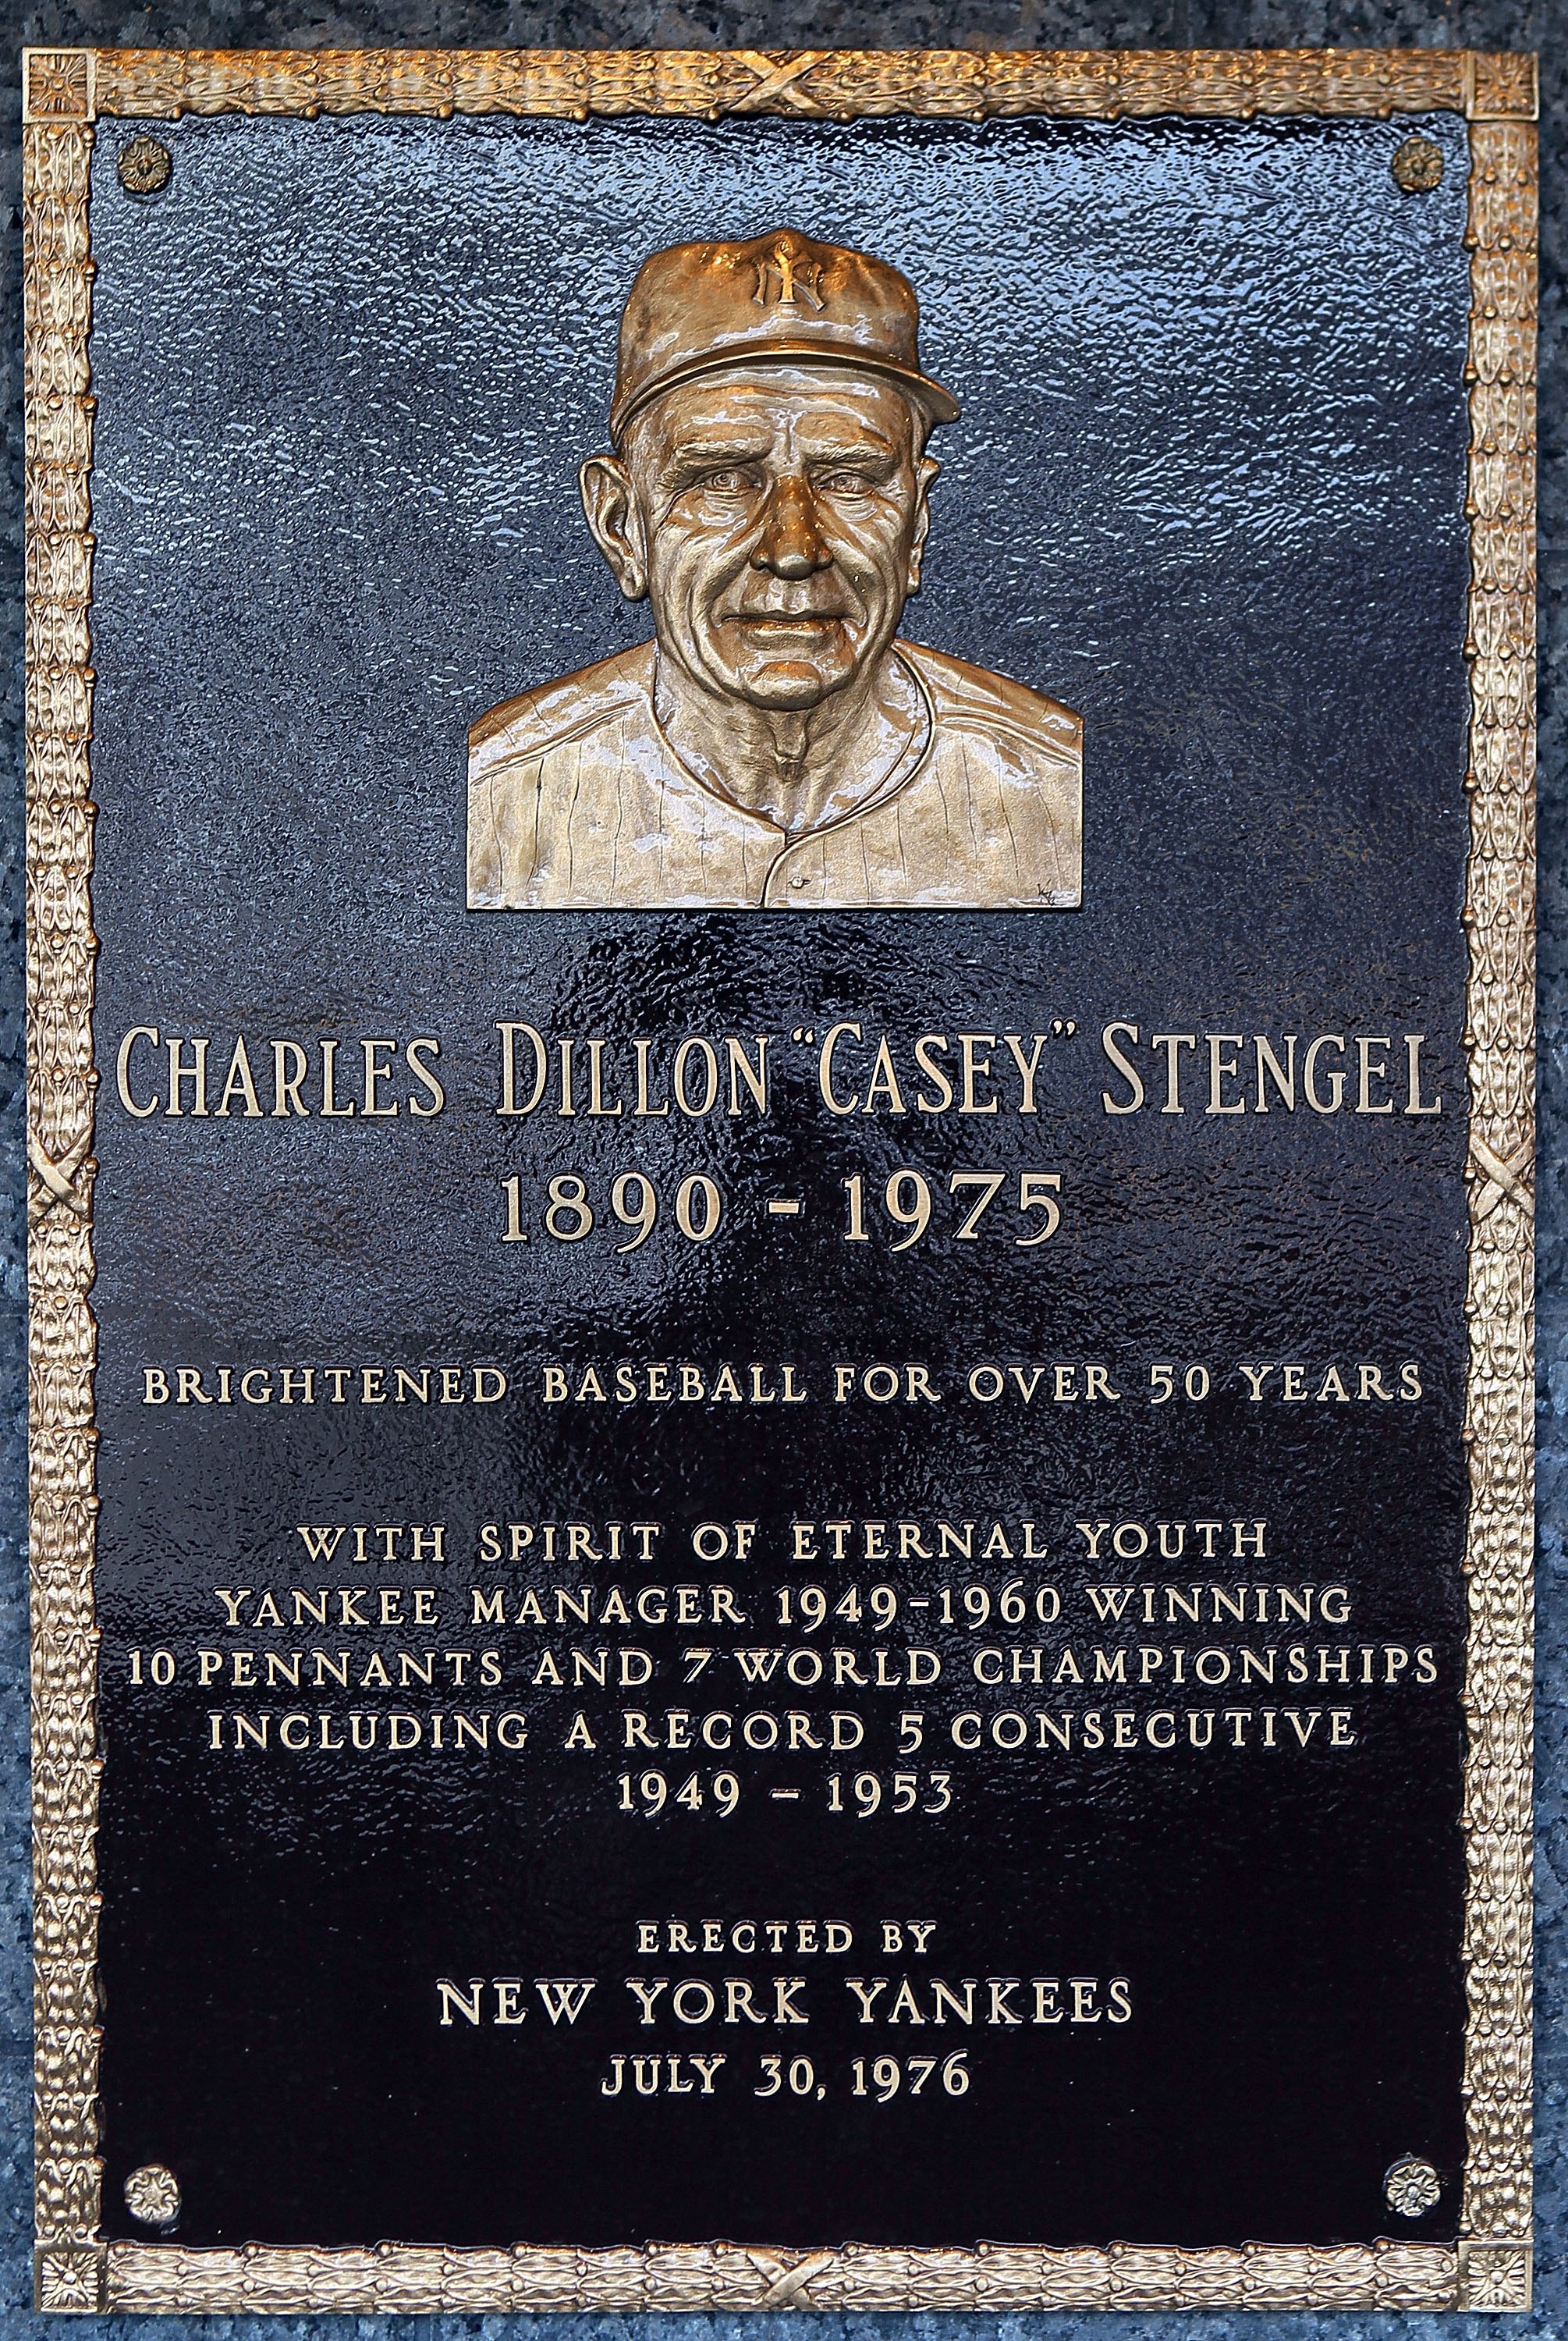 NEW YORK - MAY 02:  The plaque of Casey Stengel is seen in Monument Park at Yankee Stadium prior to the game between the New York Yankees and the Chicago White Sox on May 2, 2010 in the Bronx borough of New York City. The Yankees defeated the White Sox 12